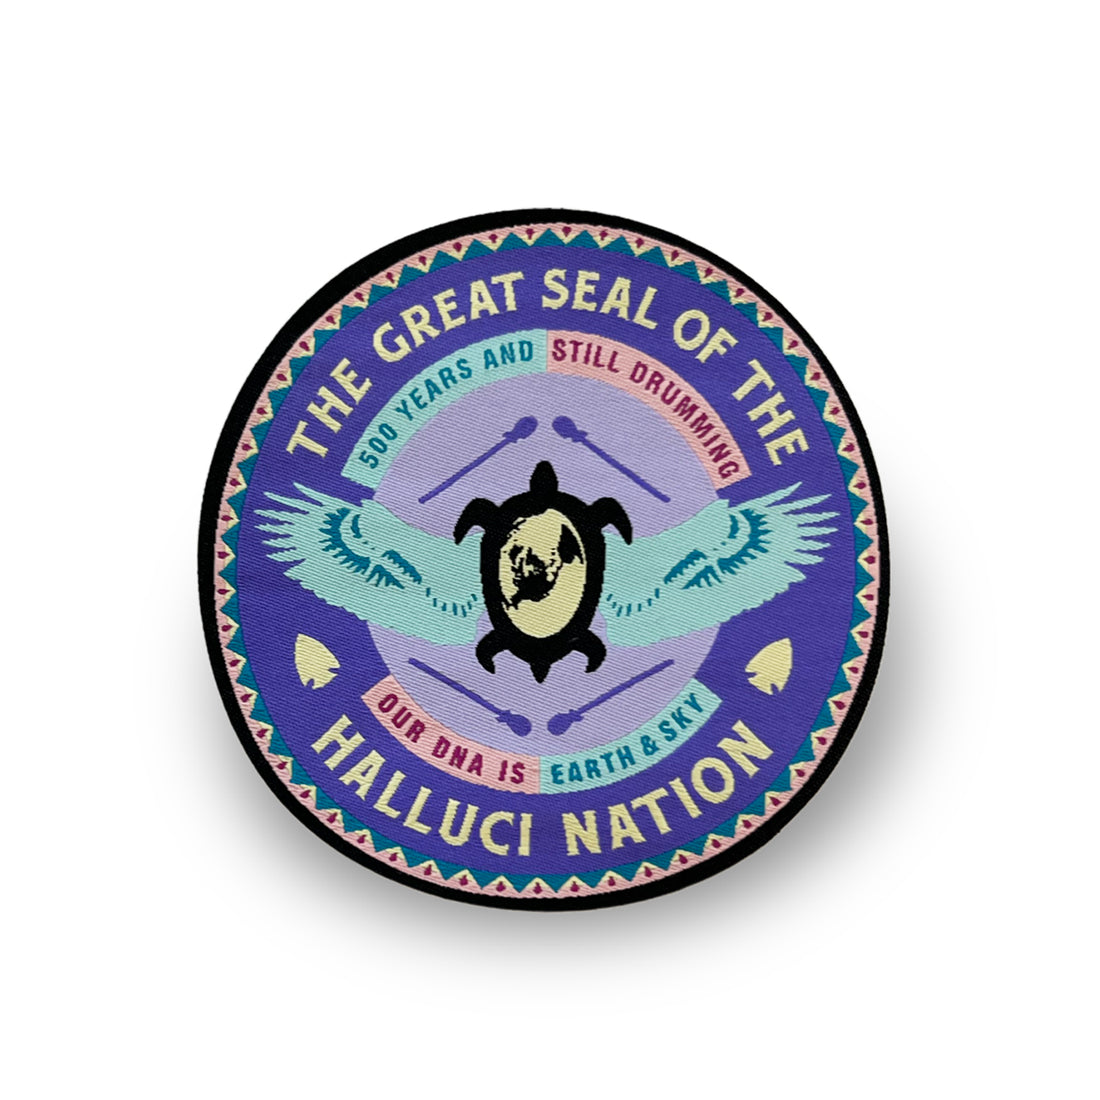 The Halluci Nation - Great Seal - Logo Patch